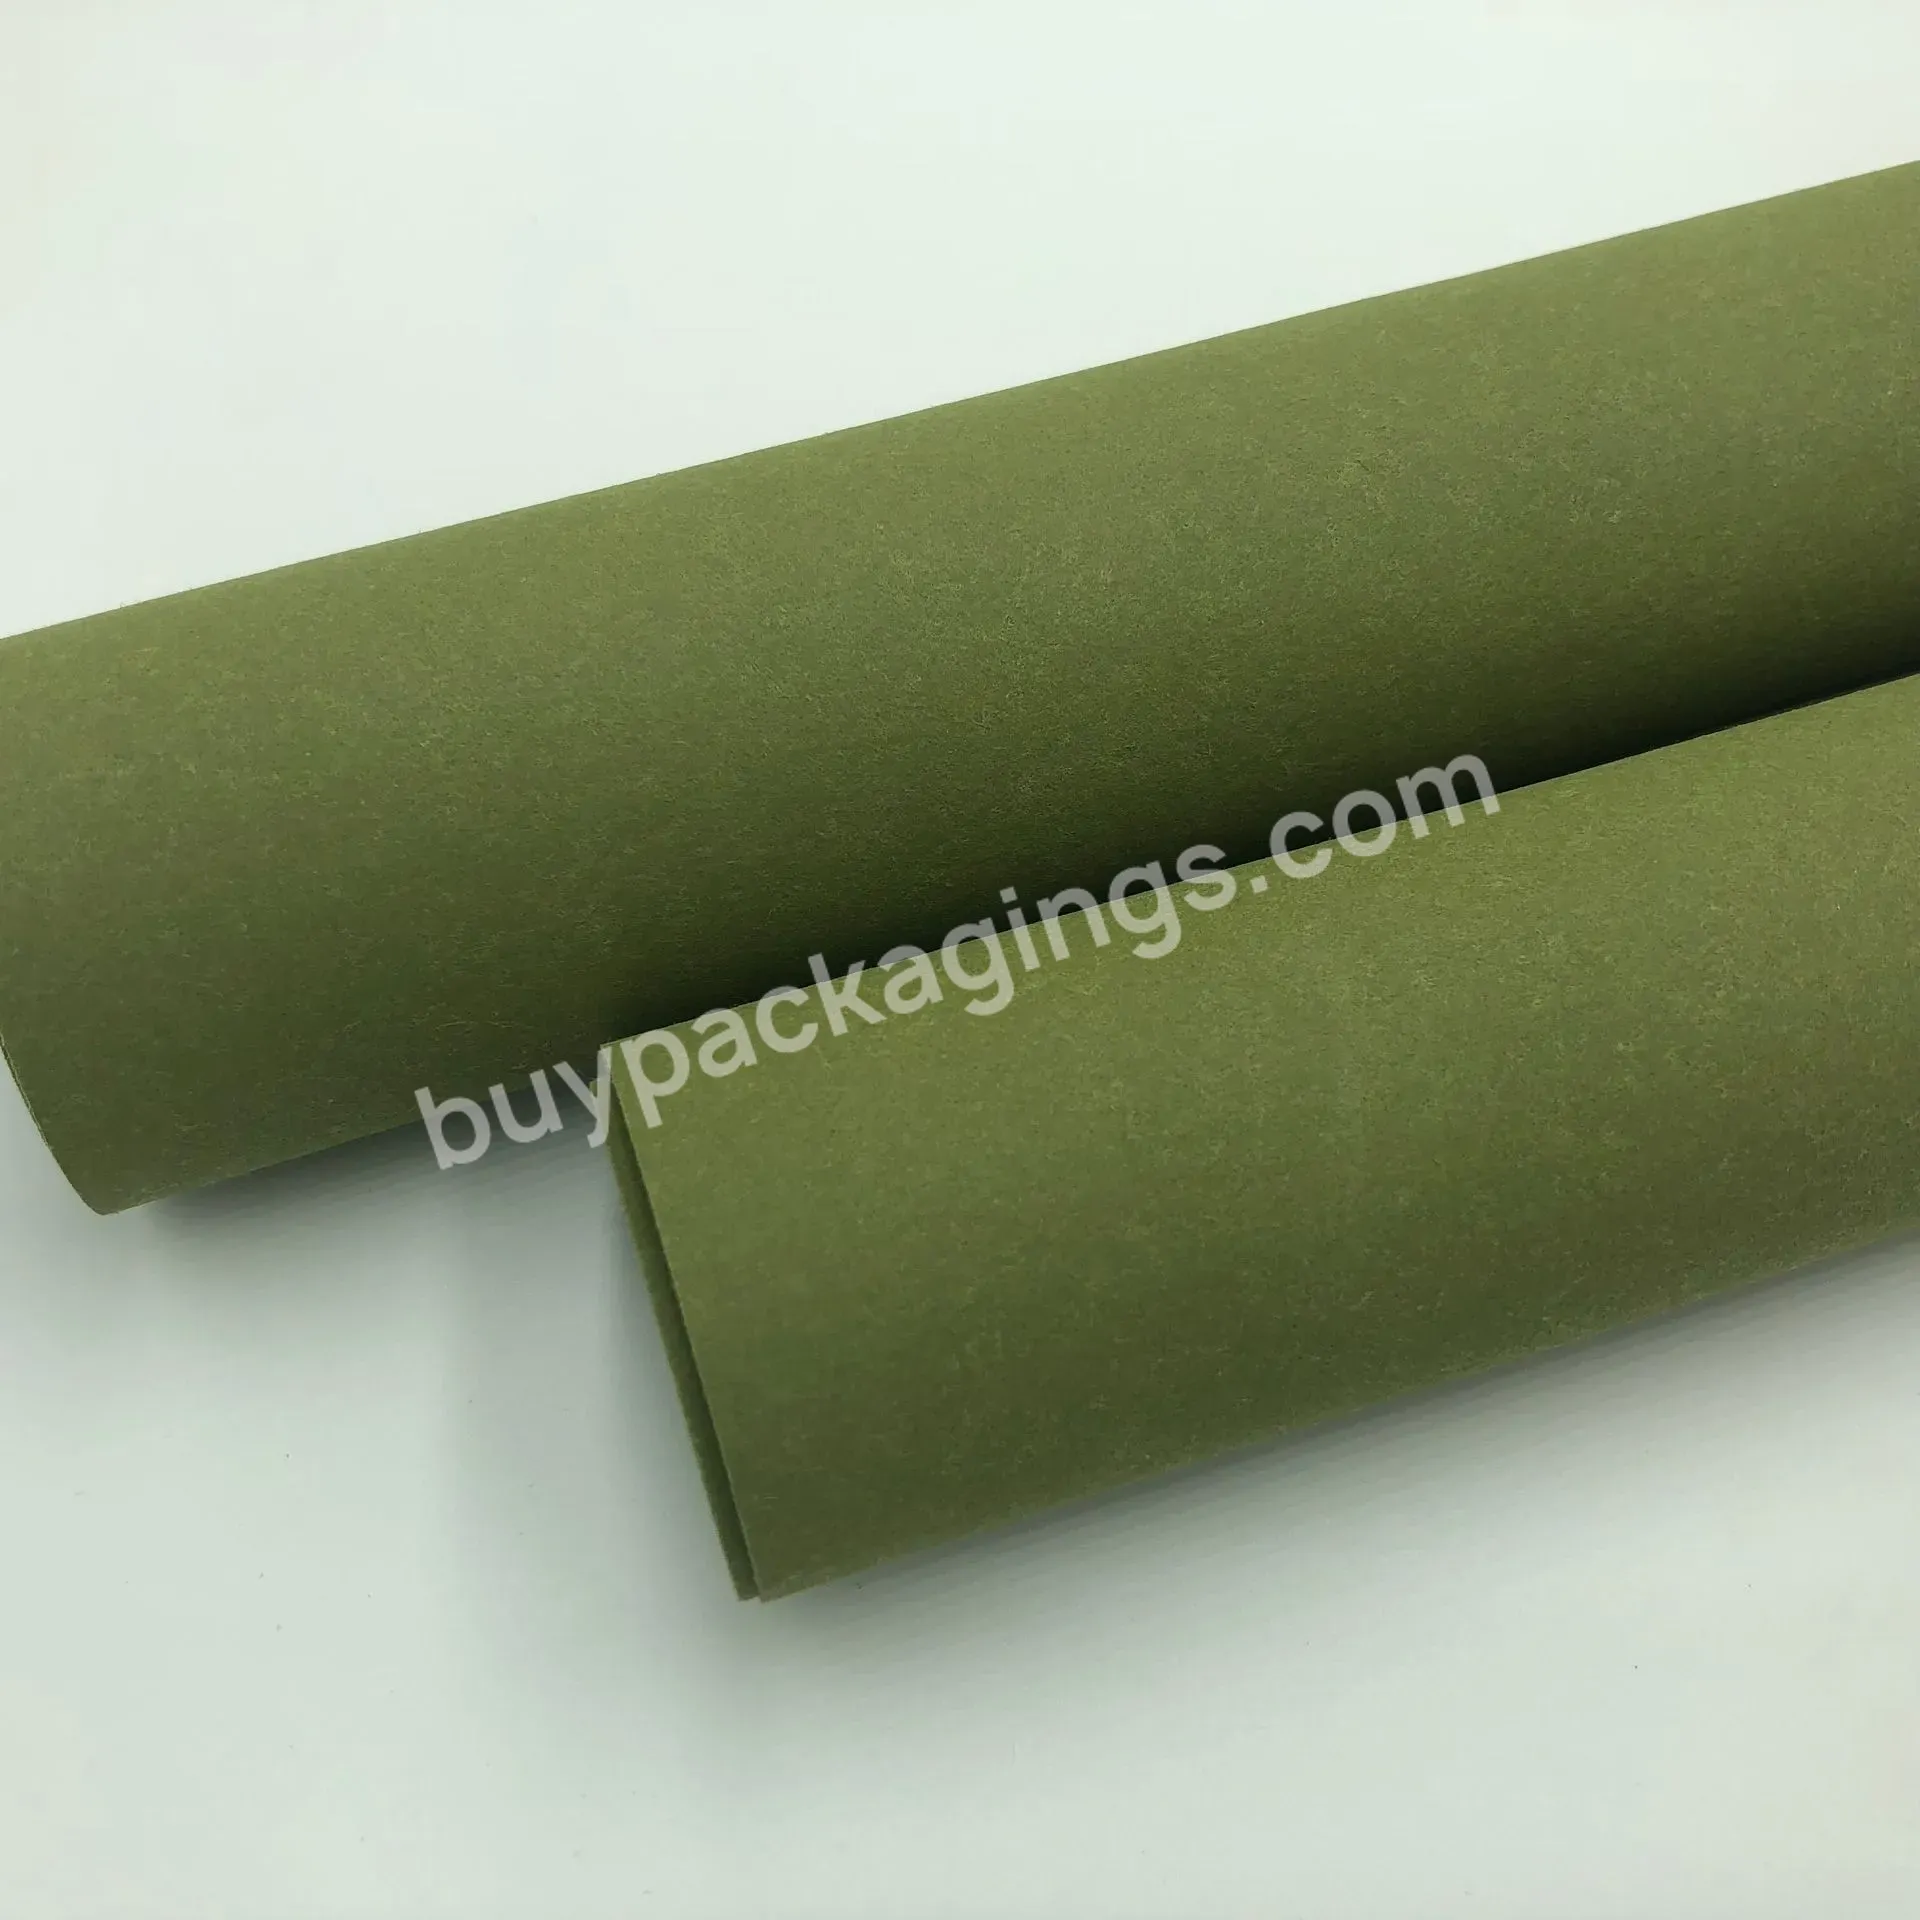 2019 Diy Art Washable Kraft Paper Fabric With 0.55mm Thickness - Buy Kraft Paper Fabric,Art Washable Kraft Paper Fabric,0.55mm Washable Kraft Paper.